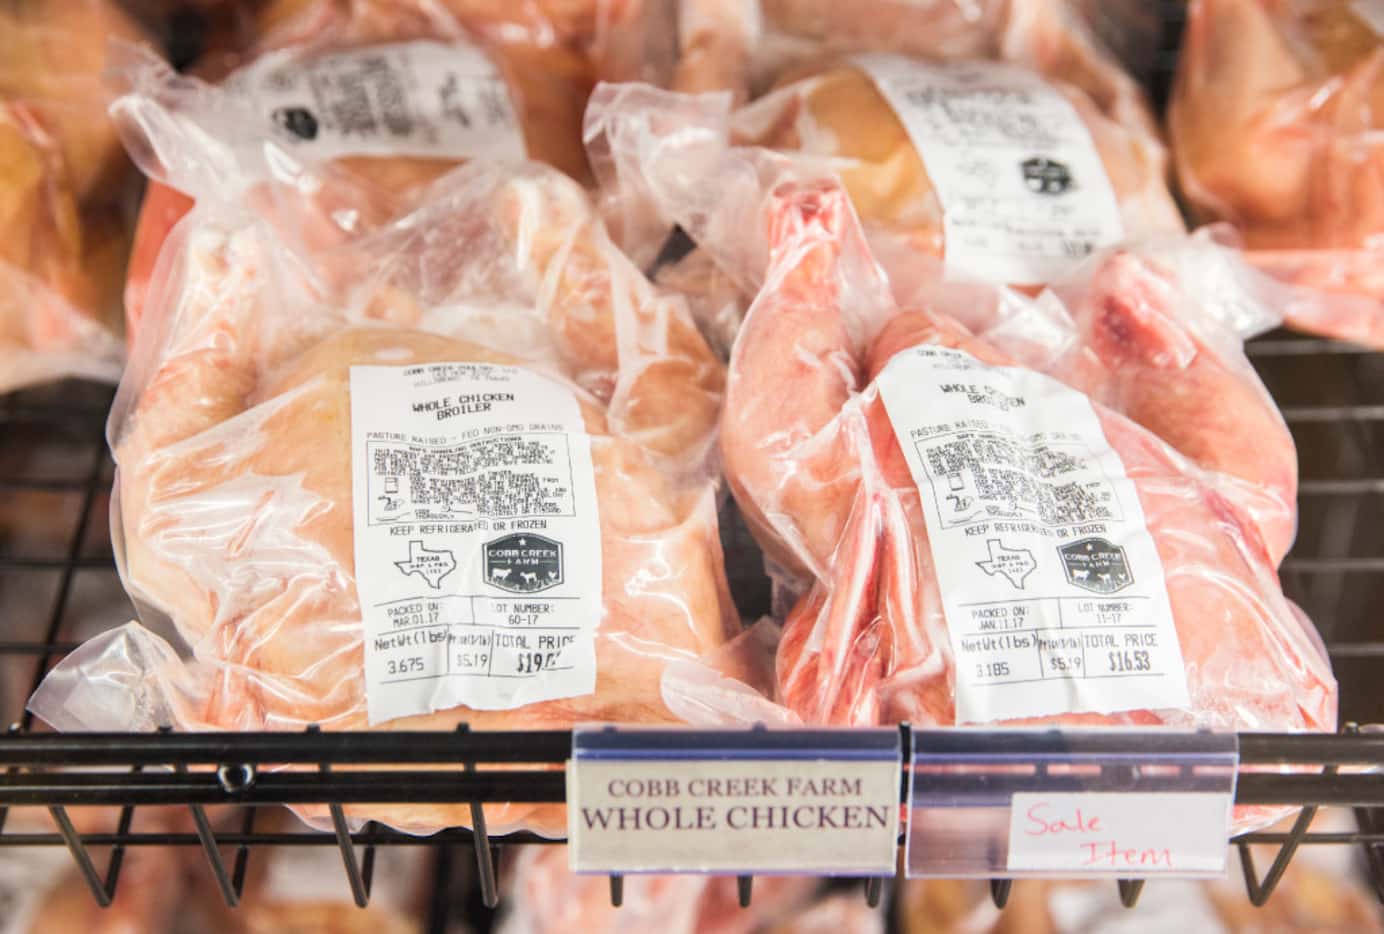 Cobb Creek Farm whole chickens are for sale at Burgundy's Local Grass Fed Meat Market.